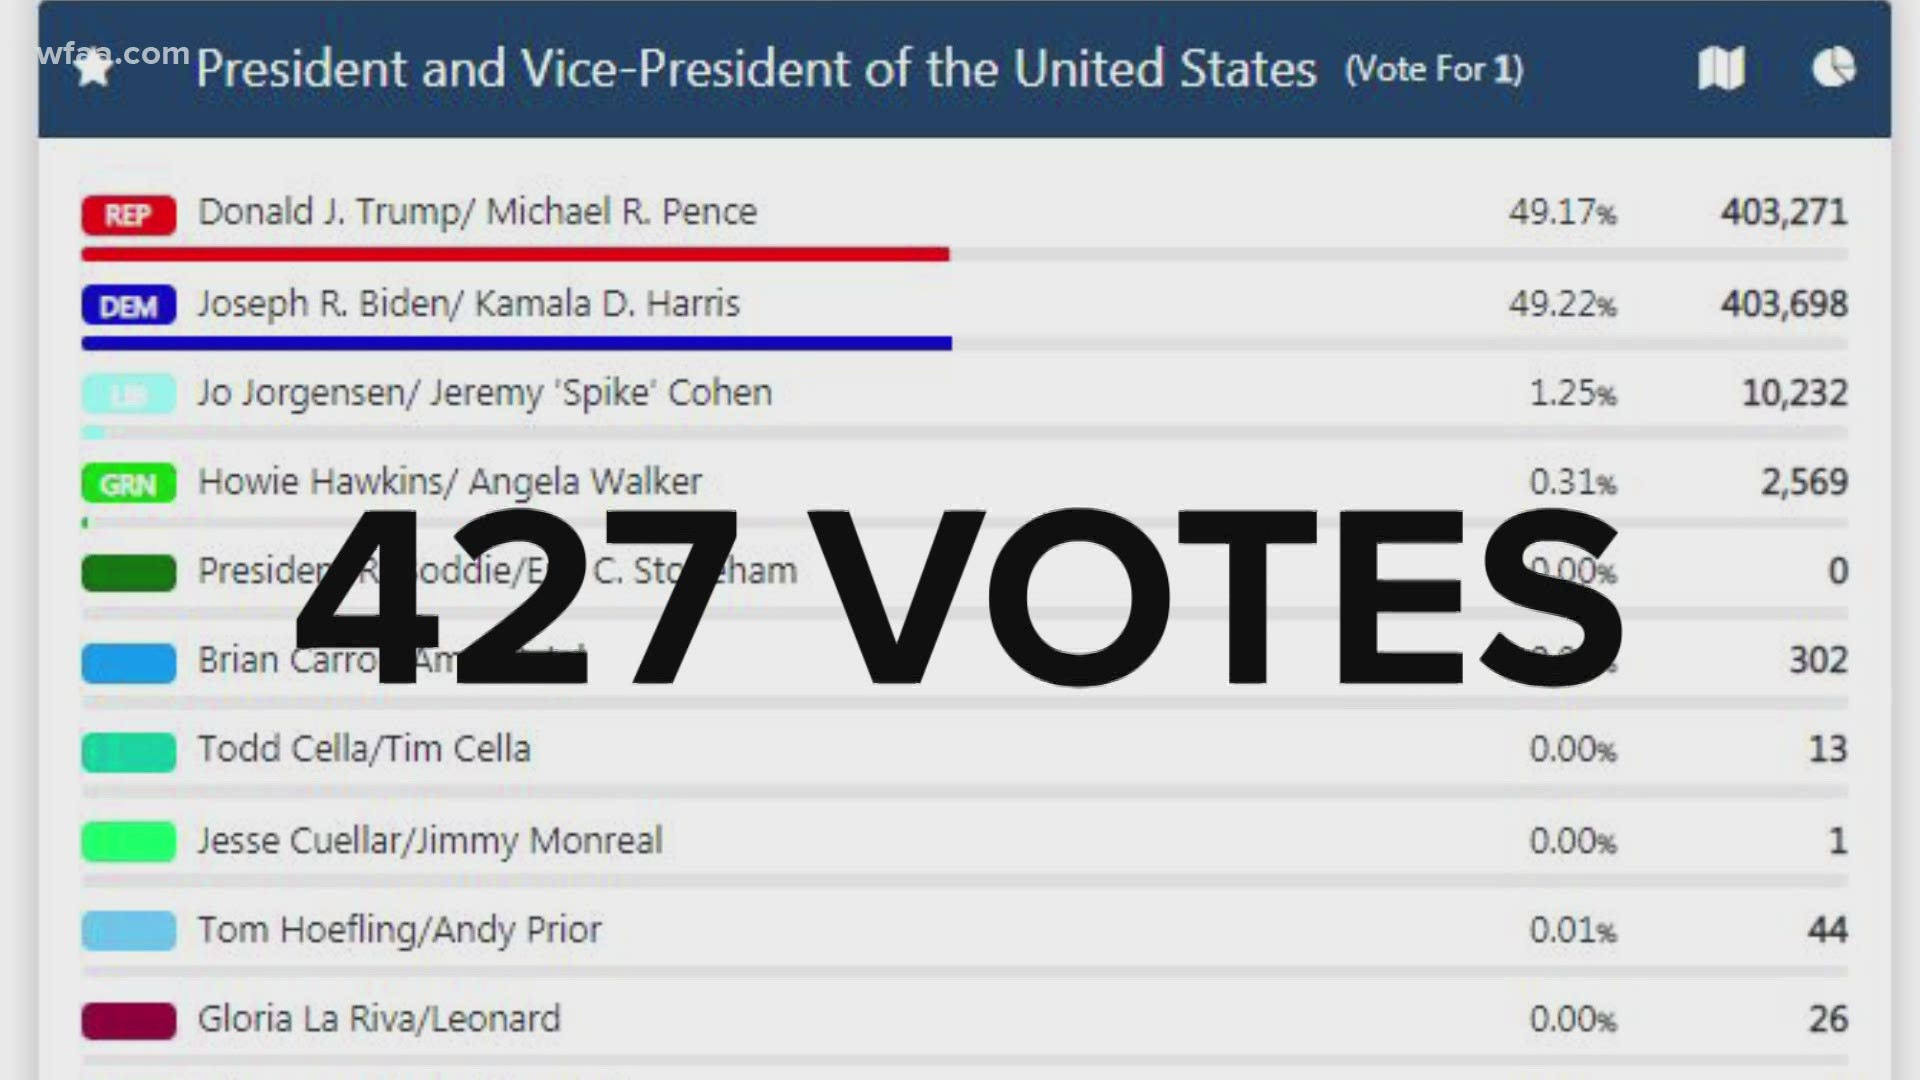 Biden currently leads President Trump by 427 votes.